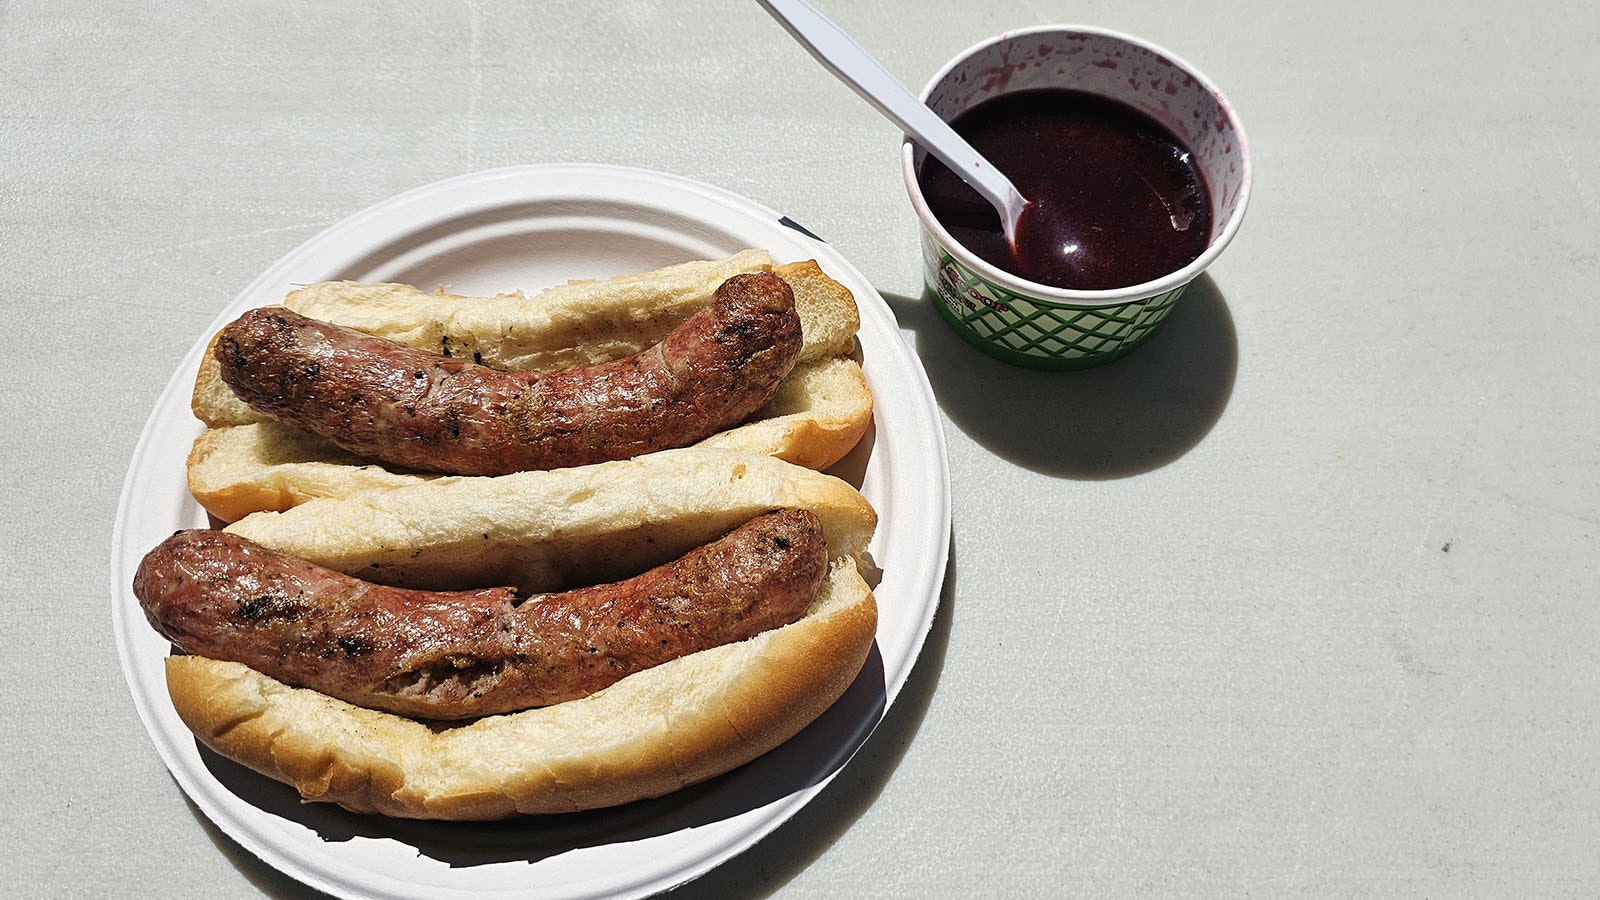 Even plain, the Lukainka, Basque sausages, are quite tasty. Shown here with blackberry sorbet.